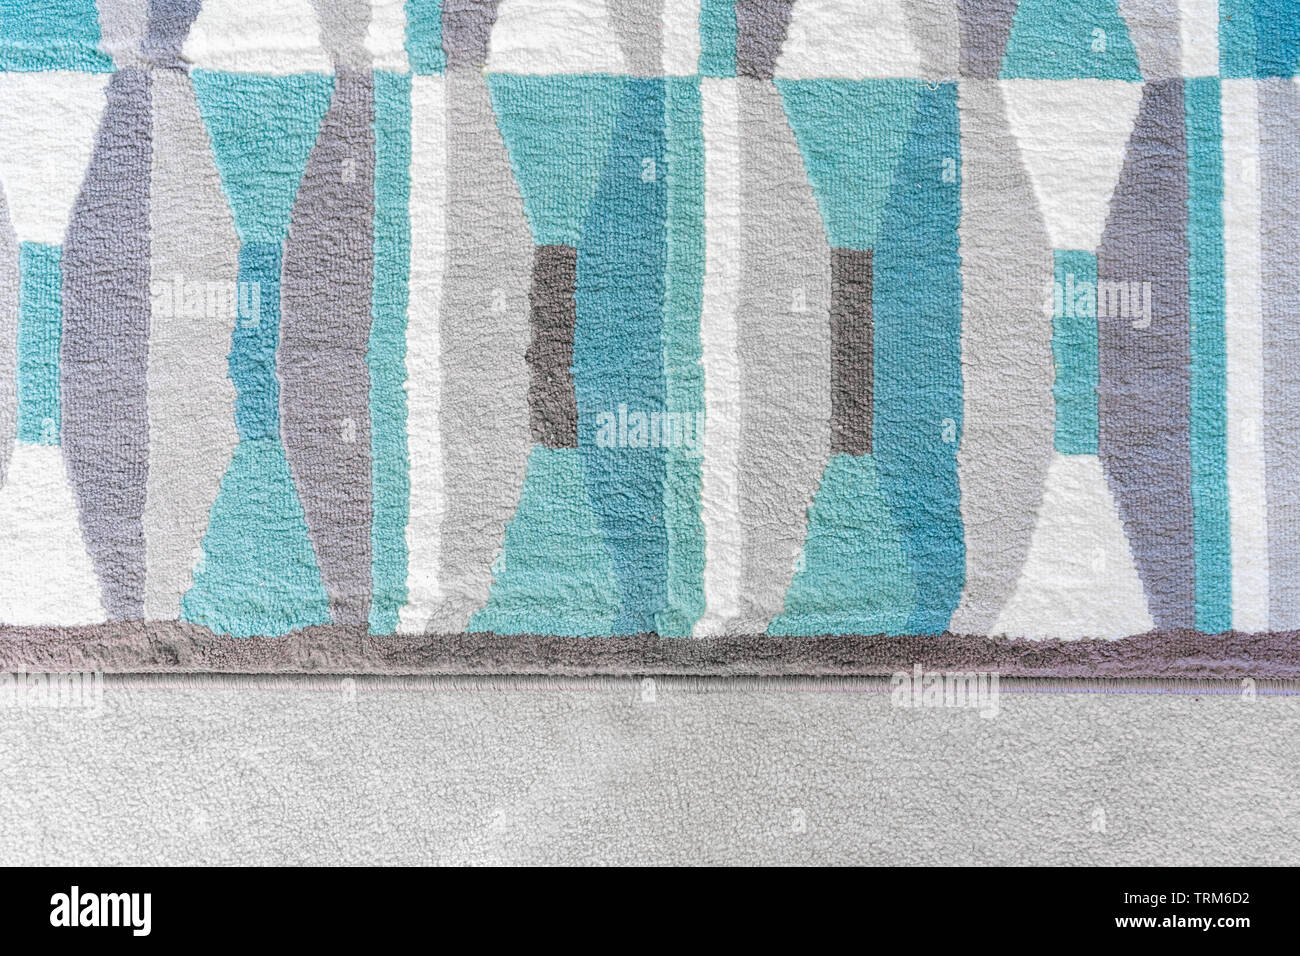 Background graphic, top view of a geometric rug with blue and grey color patterns, on top of a beige carpet, as a design element in home decor. Stock Photo